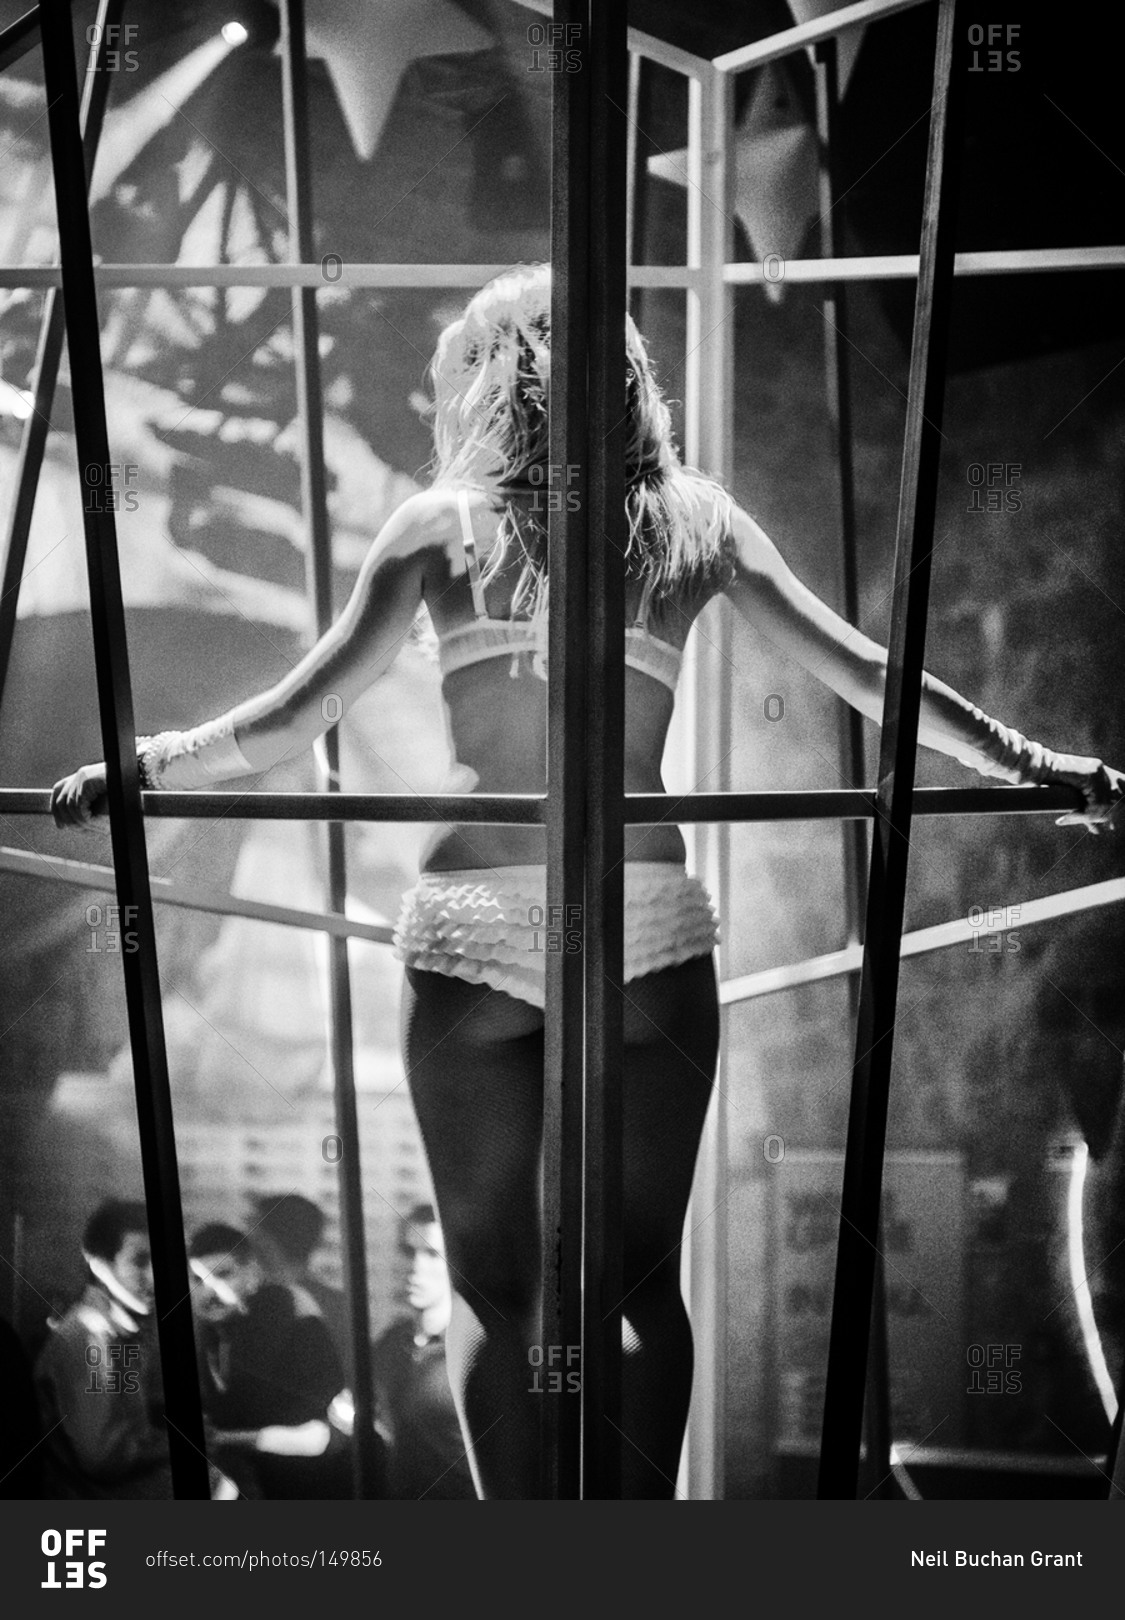 Cage dancer in a night club